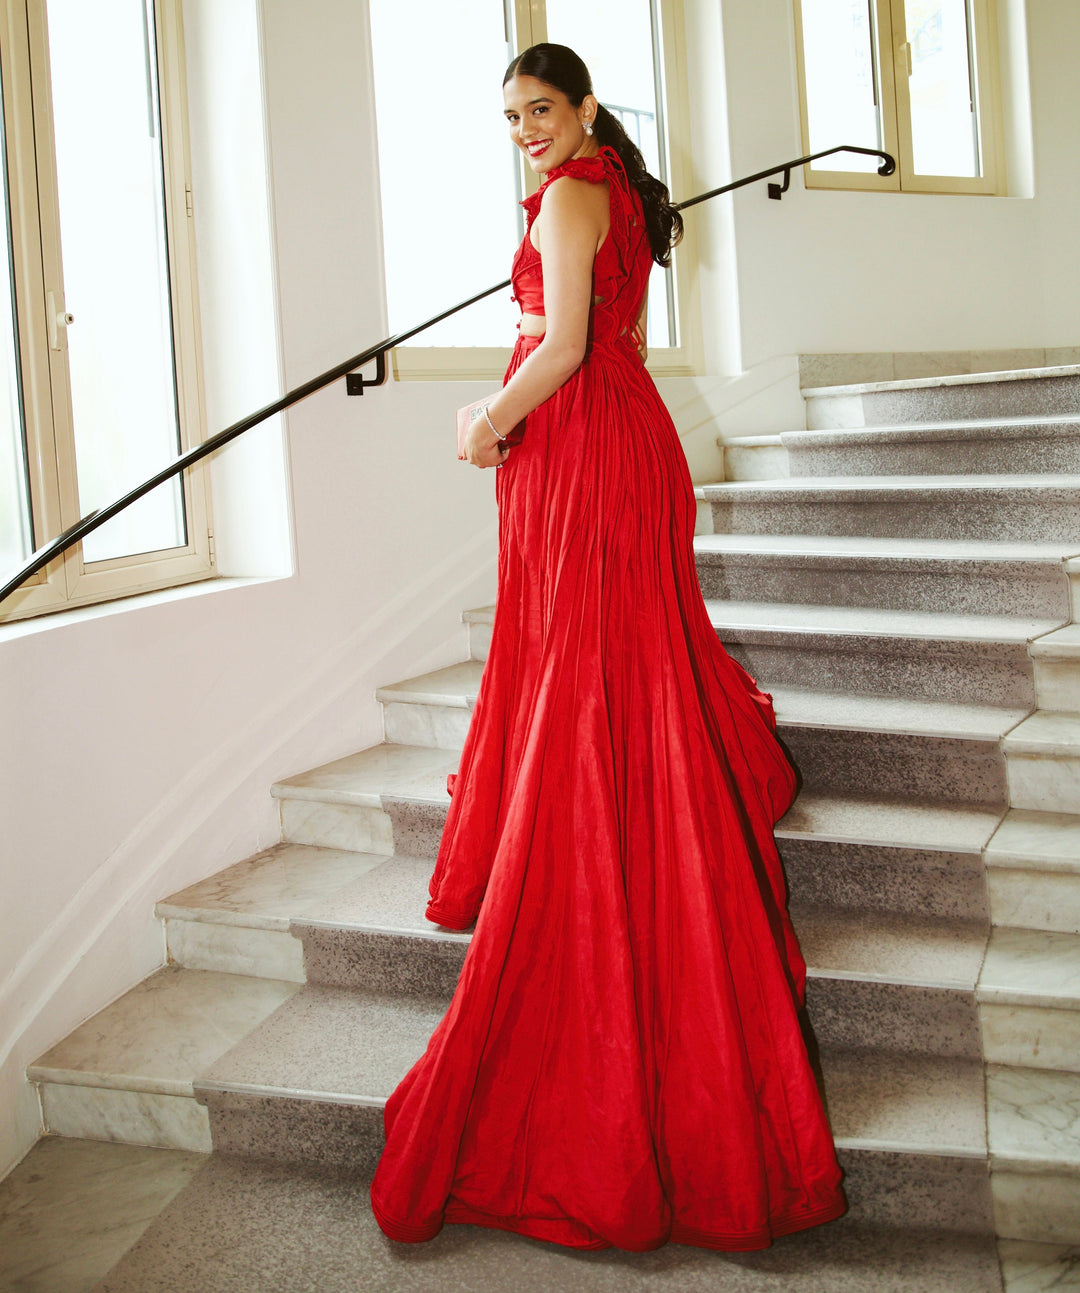 Shivani Bafna - Red Gown with Corals and Cording